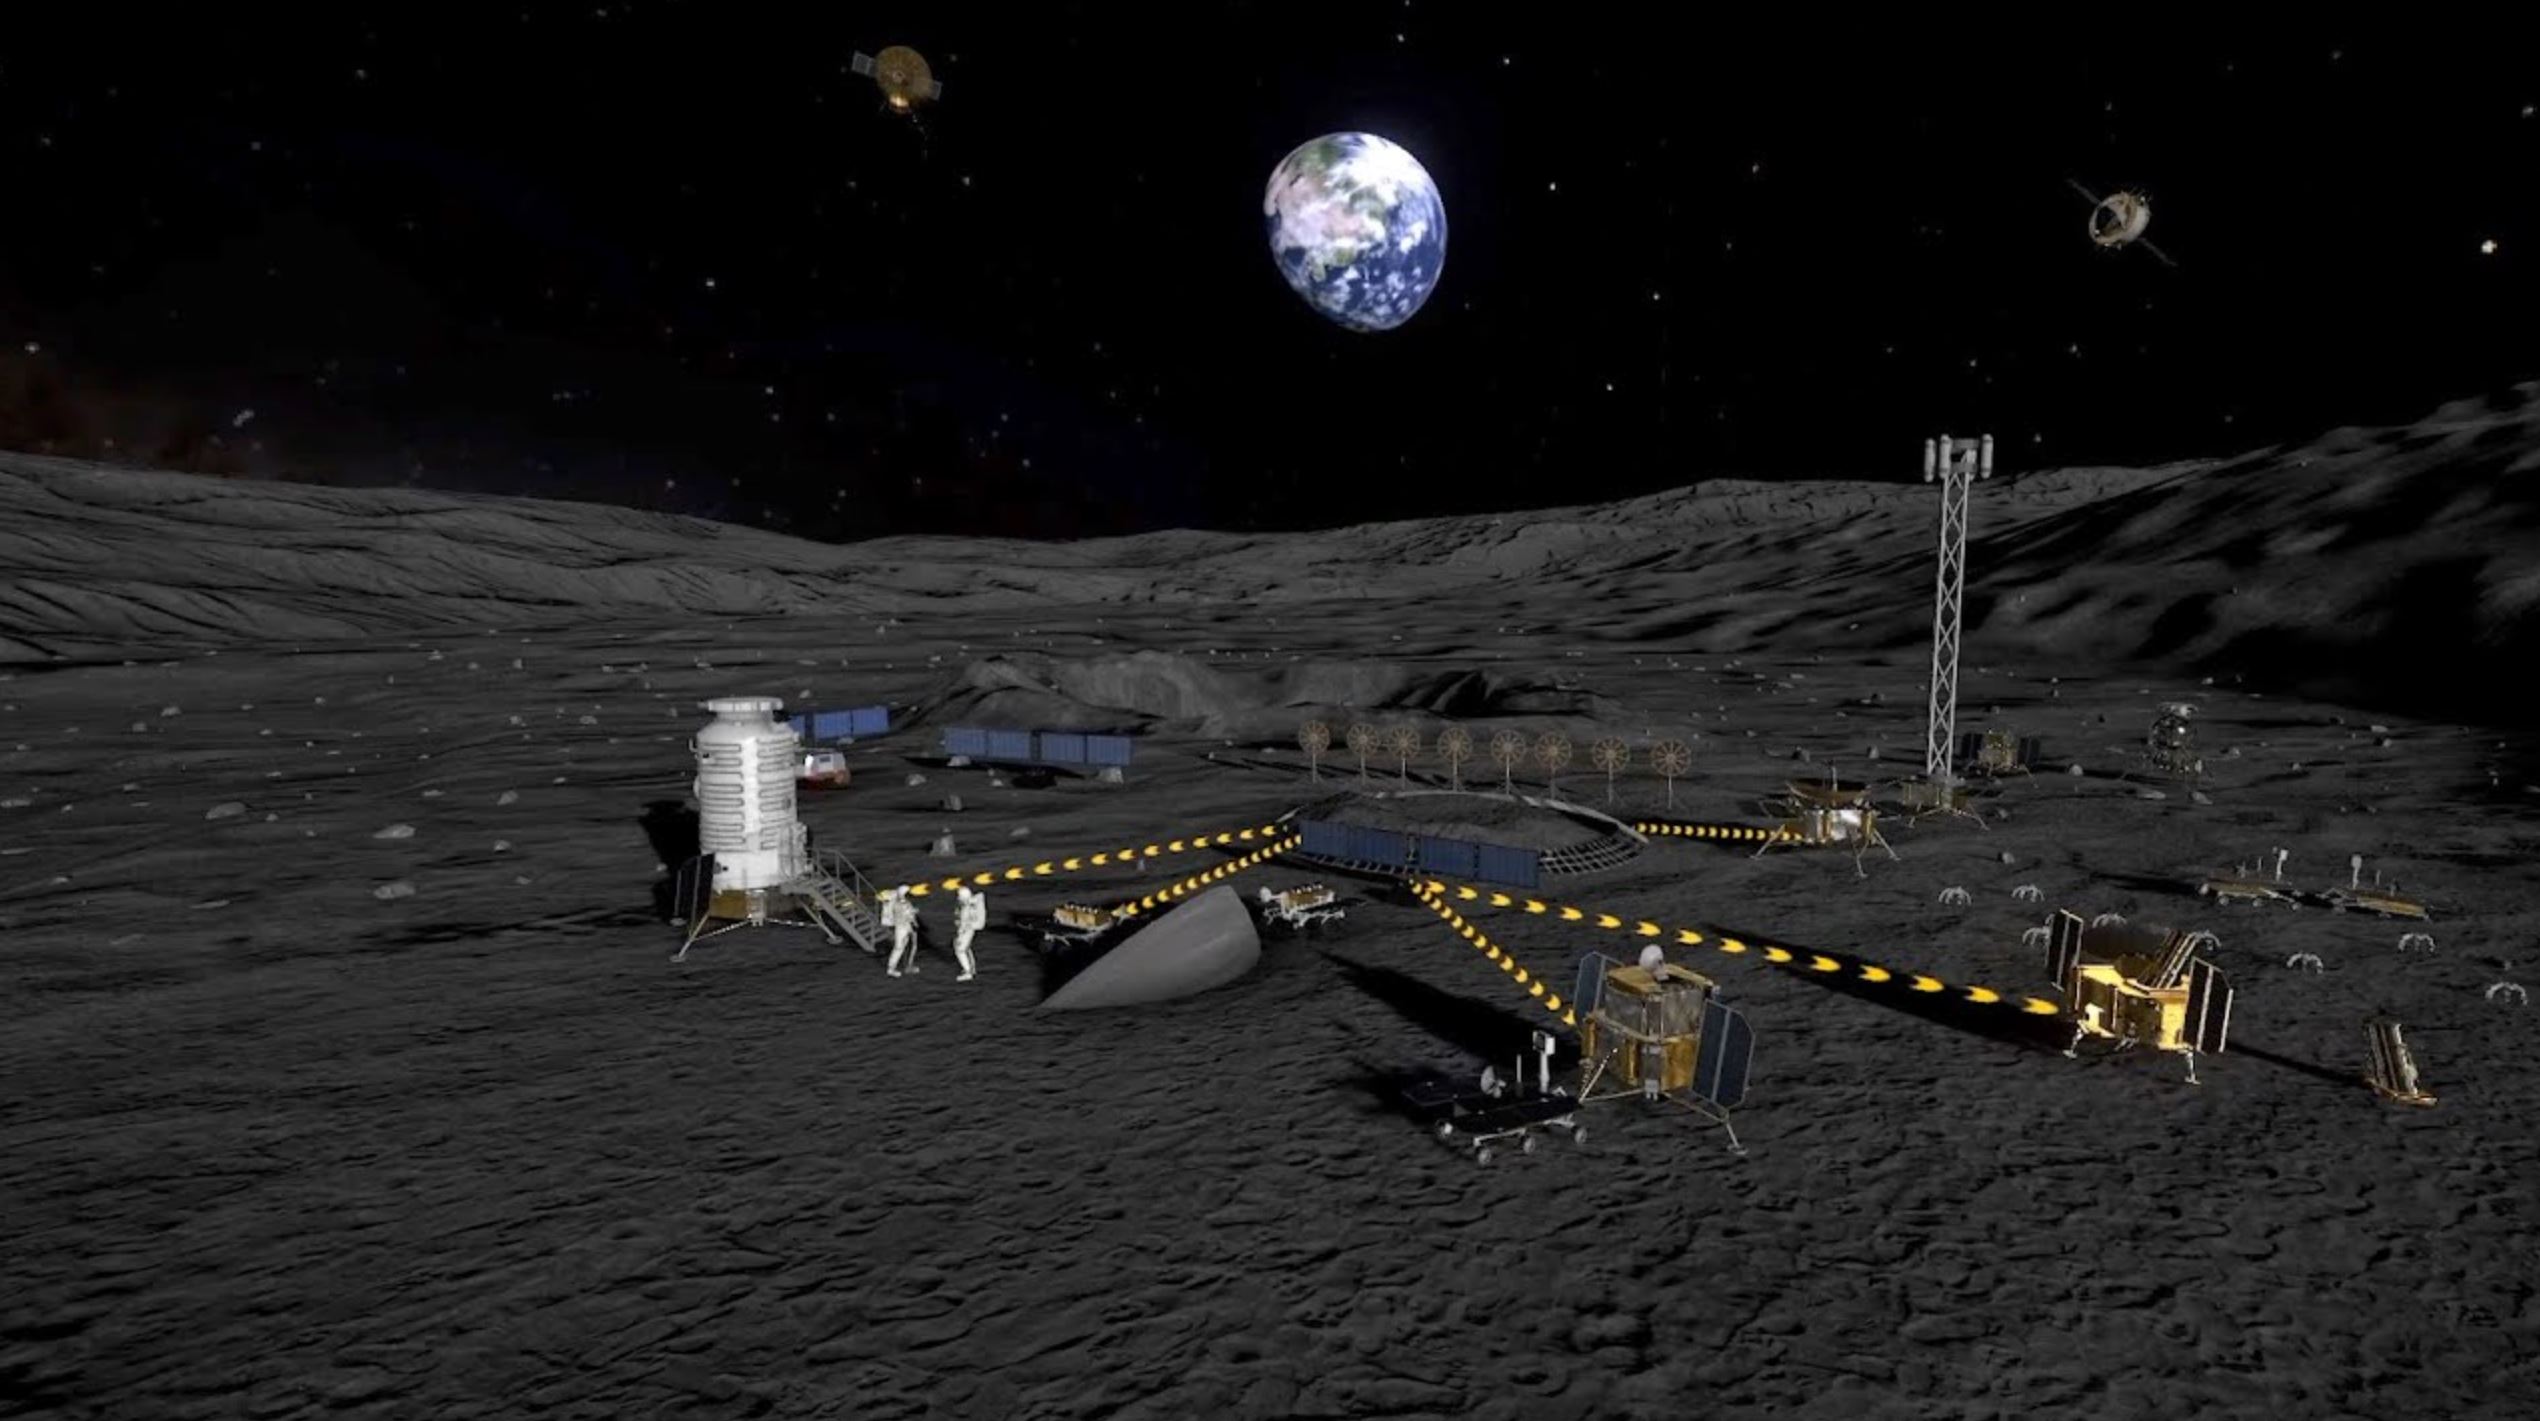 China adds Belarus as partner for ILRS moon base